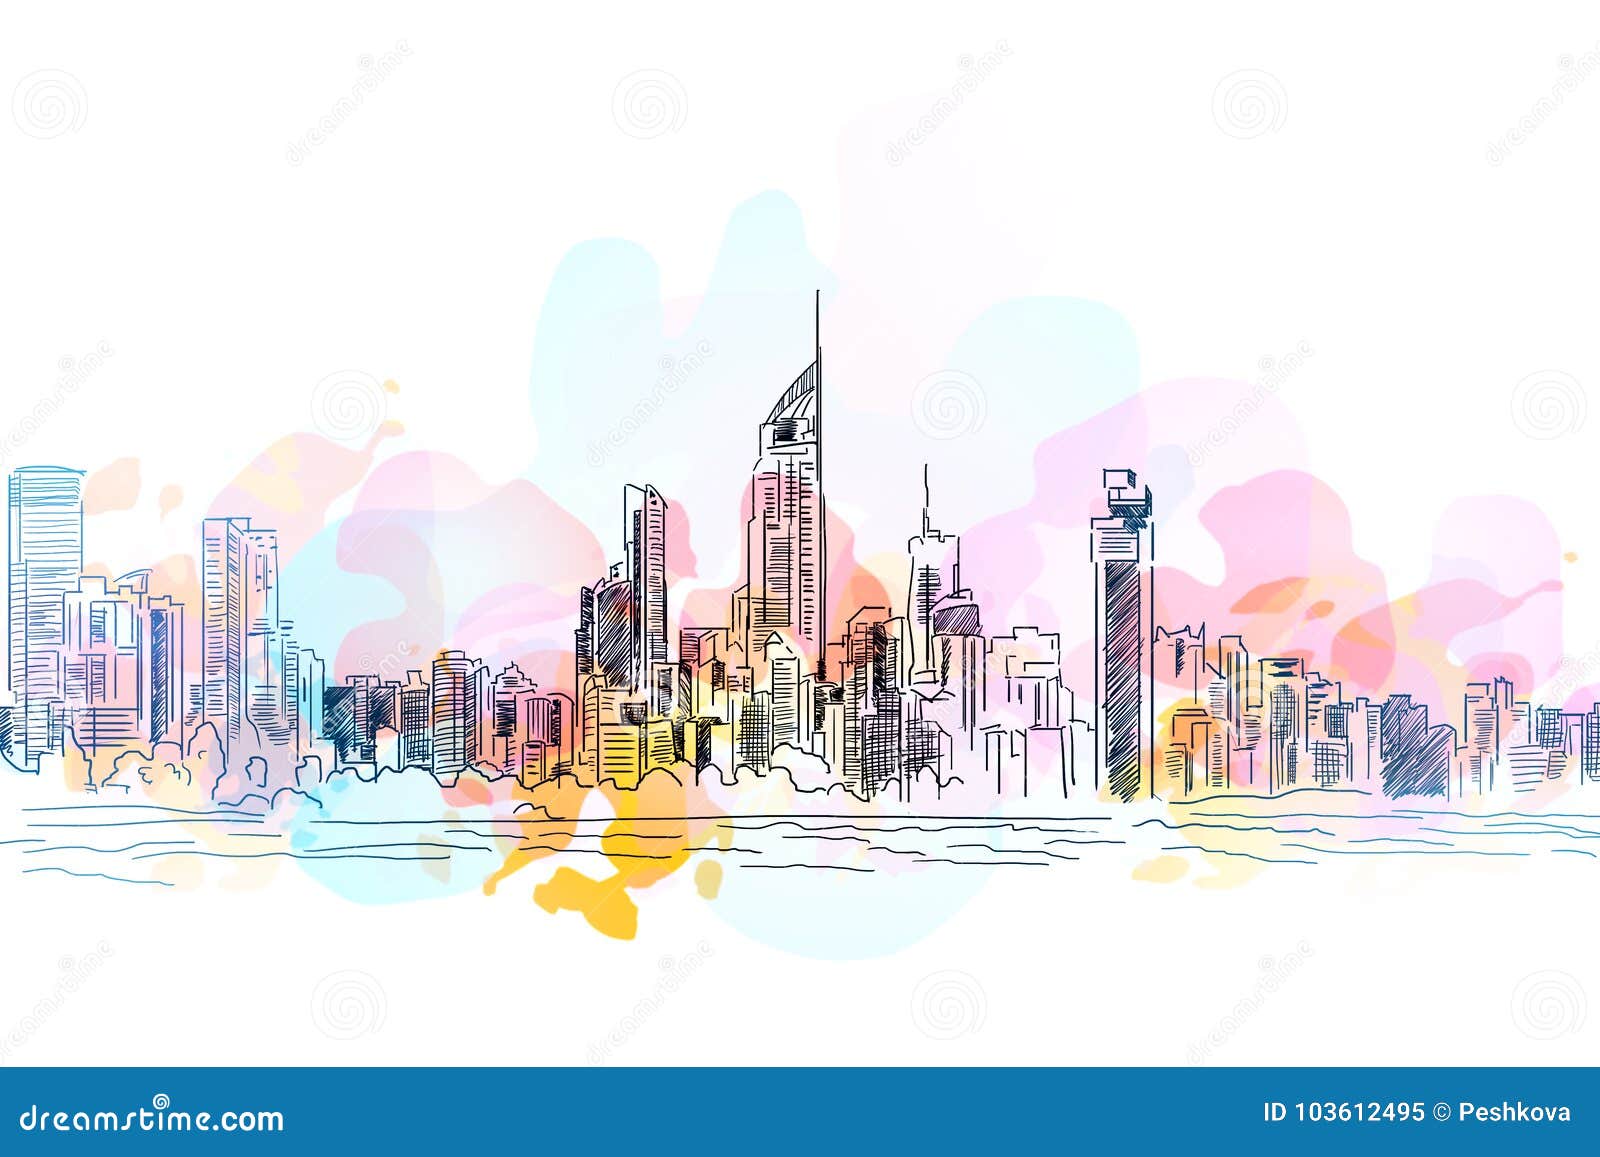 Sketch city background Royalty Free Vector Image